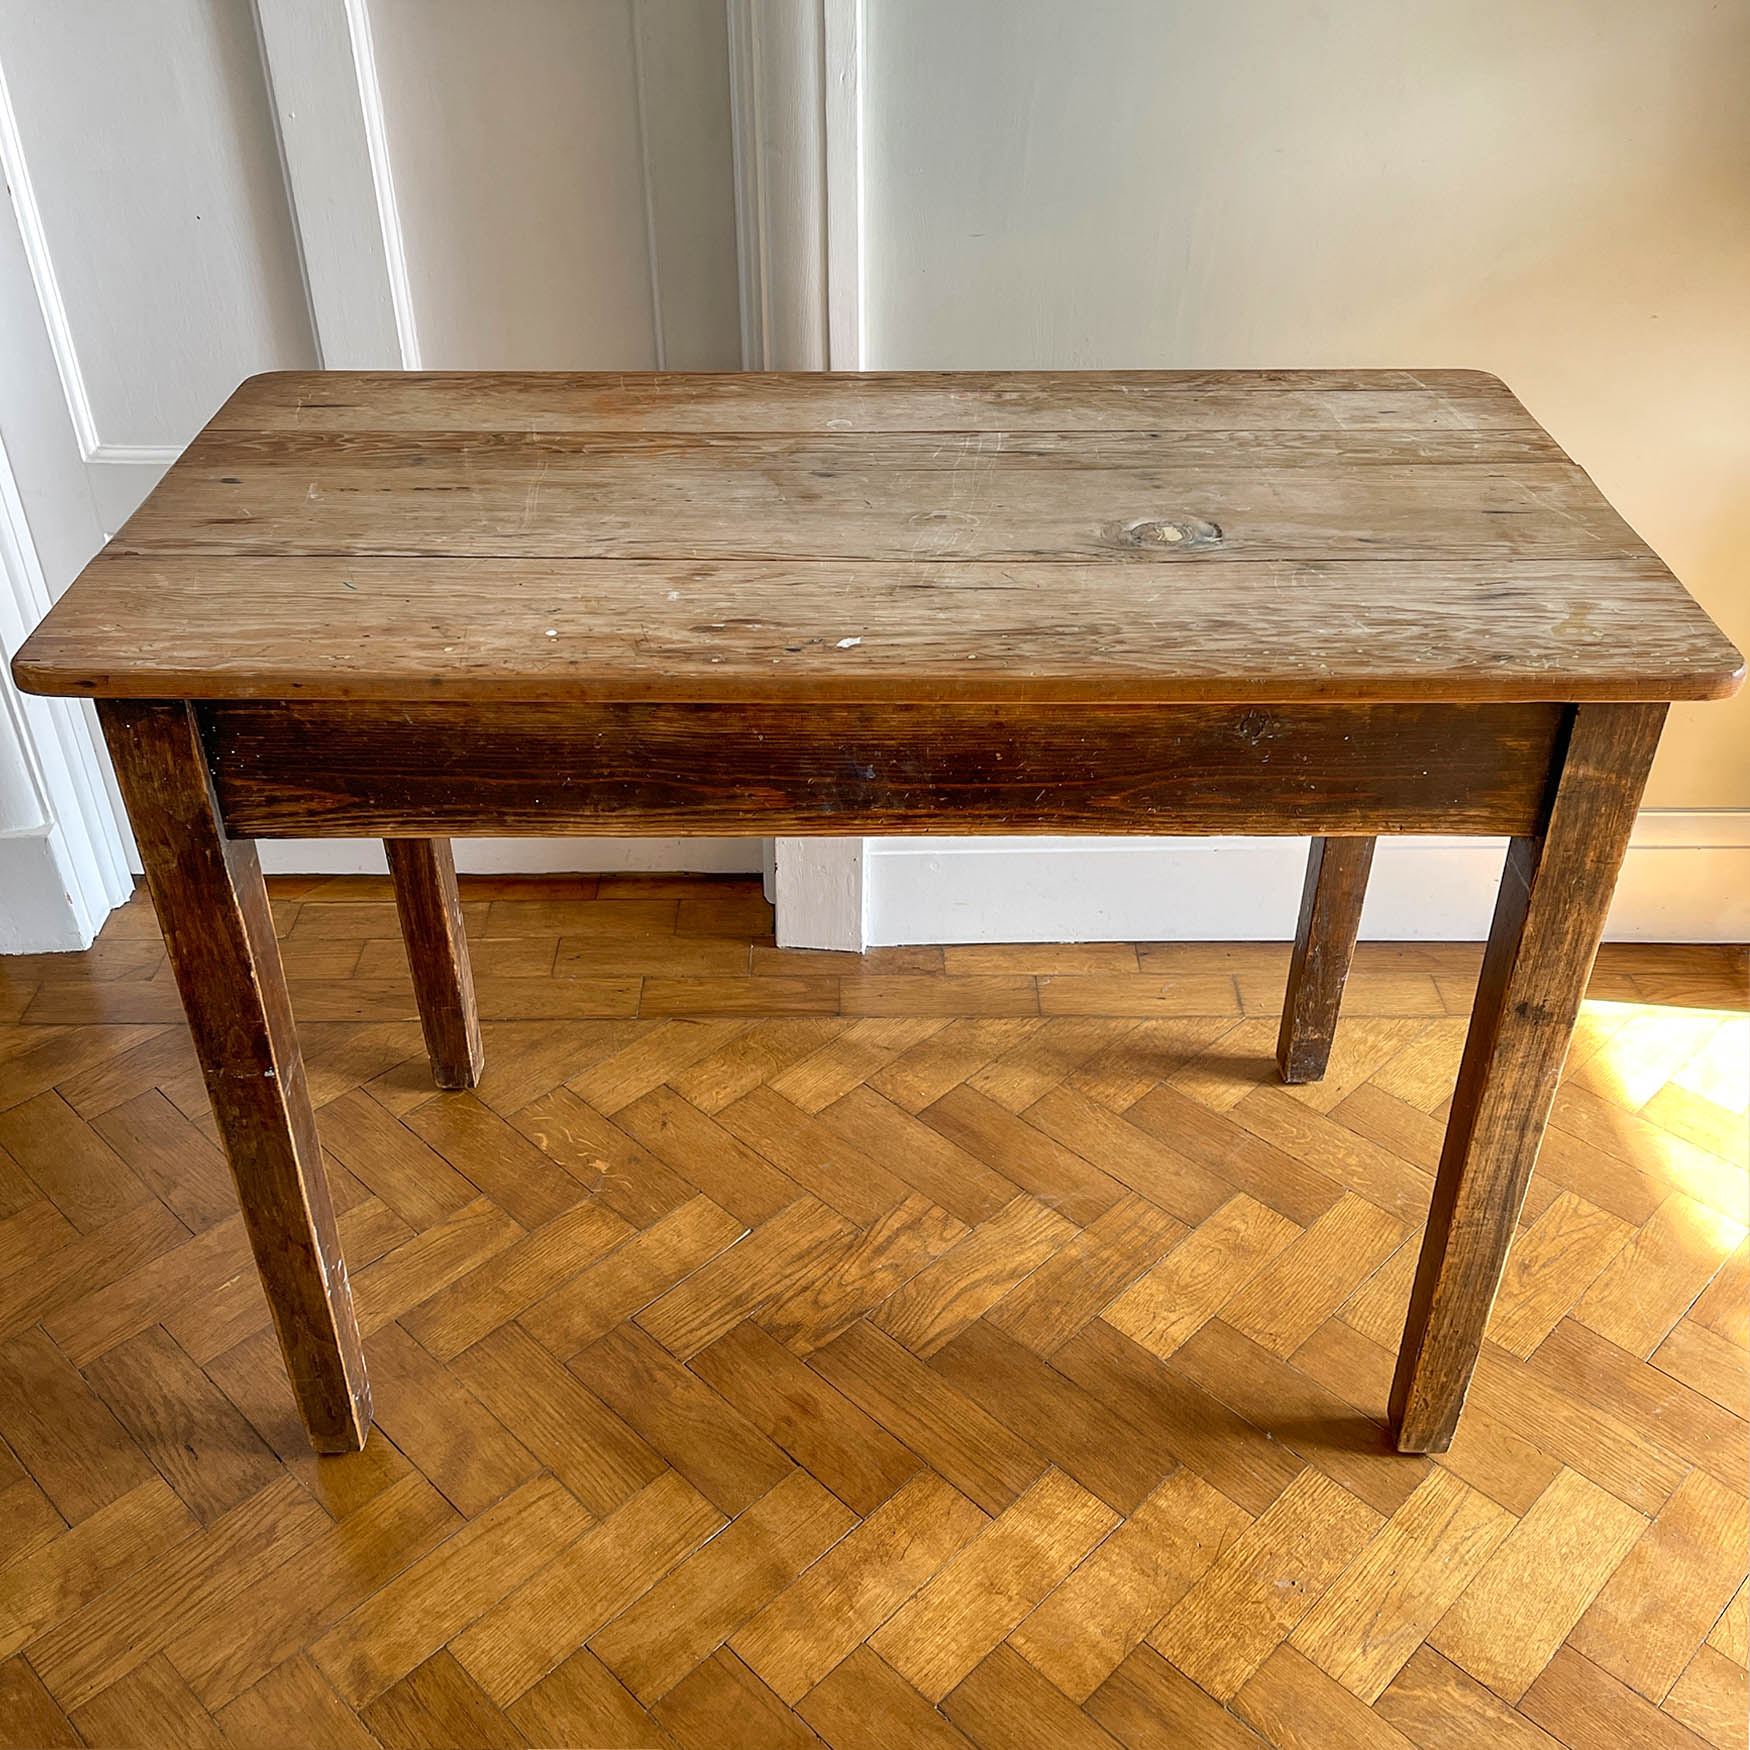 An Antique Rustic Pine Kitchen Table with handy draw and a superb age worn top. It sits upon four simple legs. It's just got that bang on look. - SHOP NOW - www.intovintage.co.uk